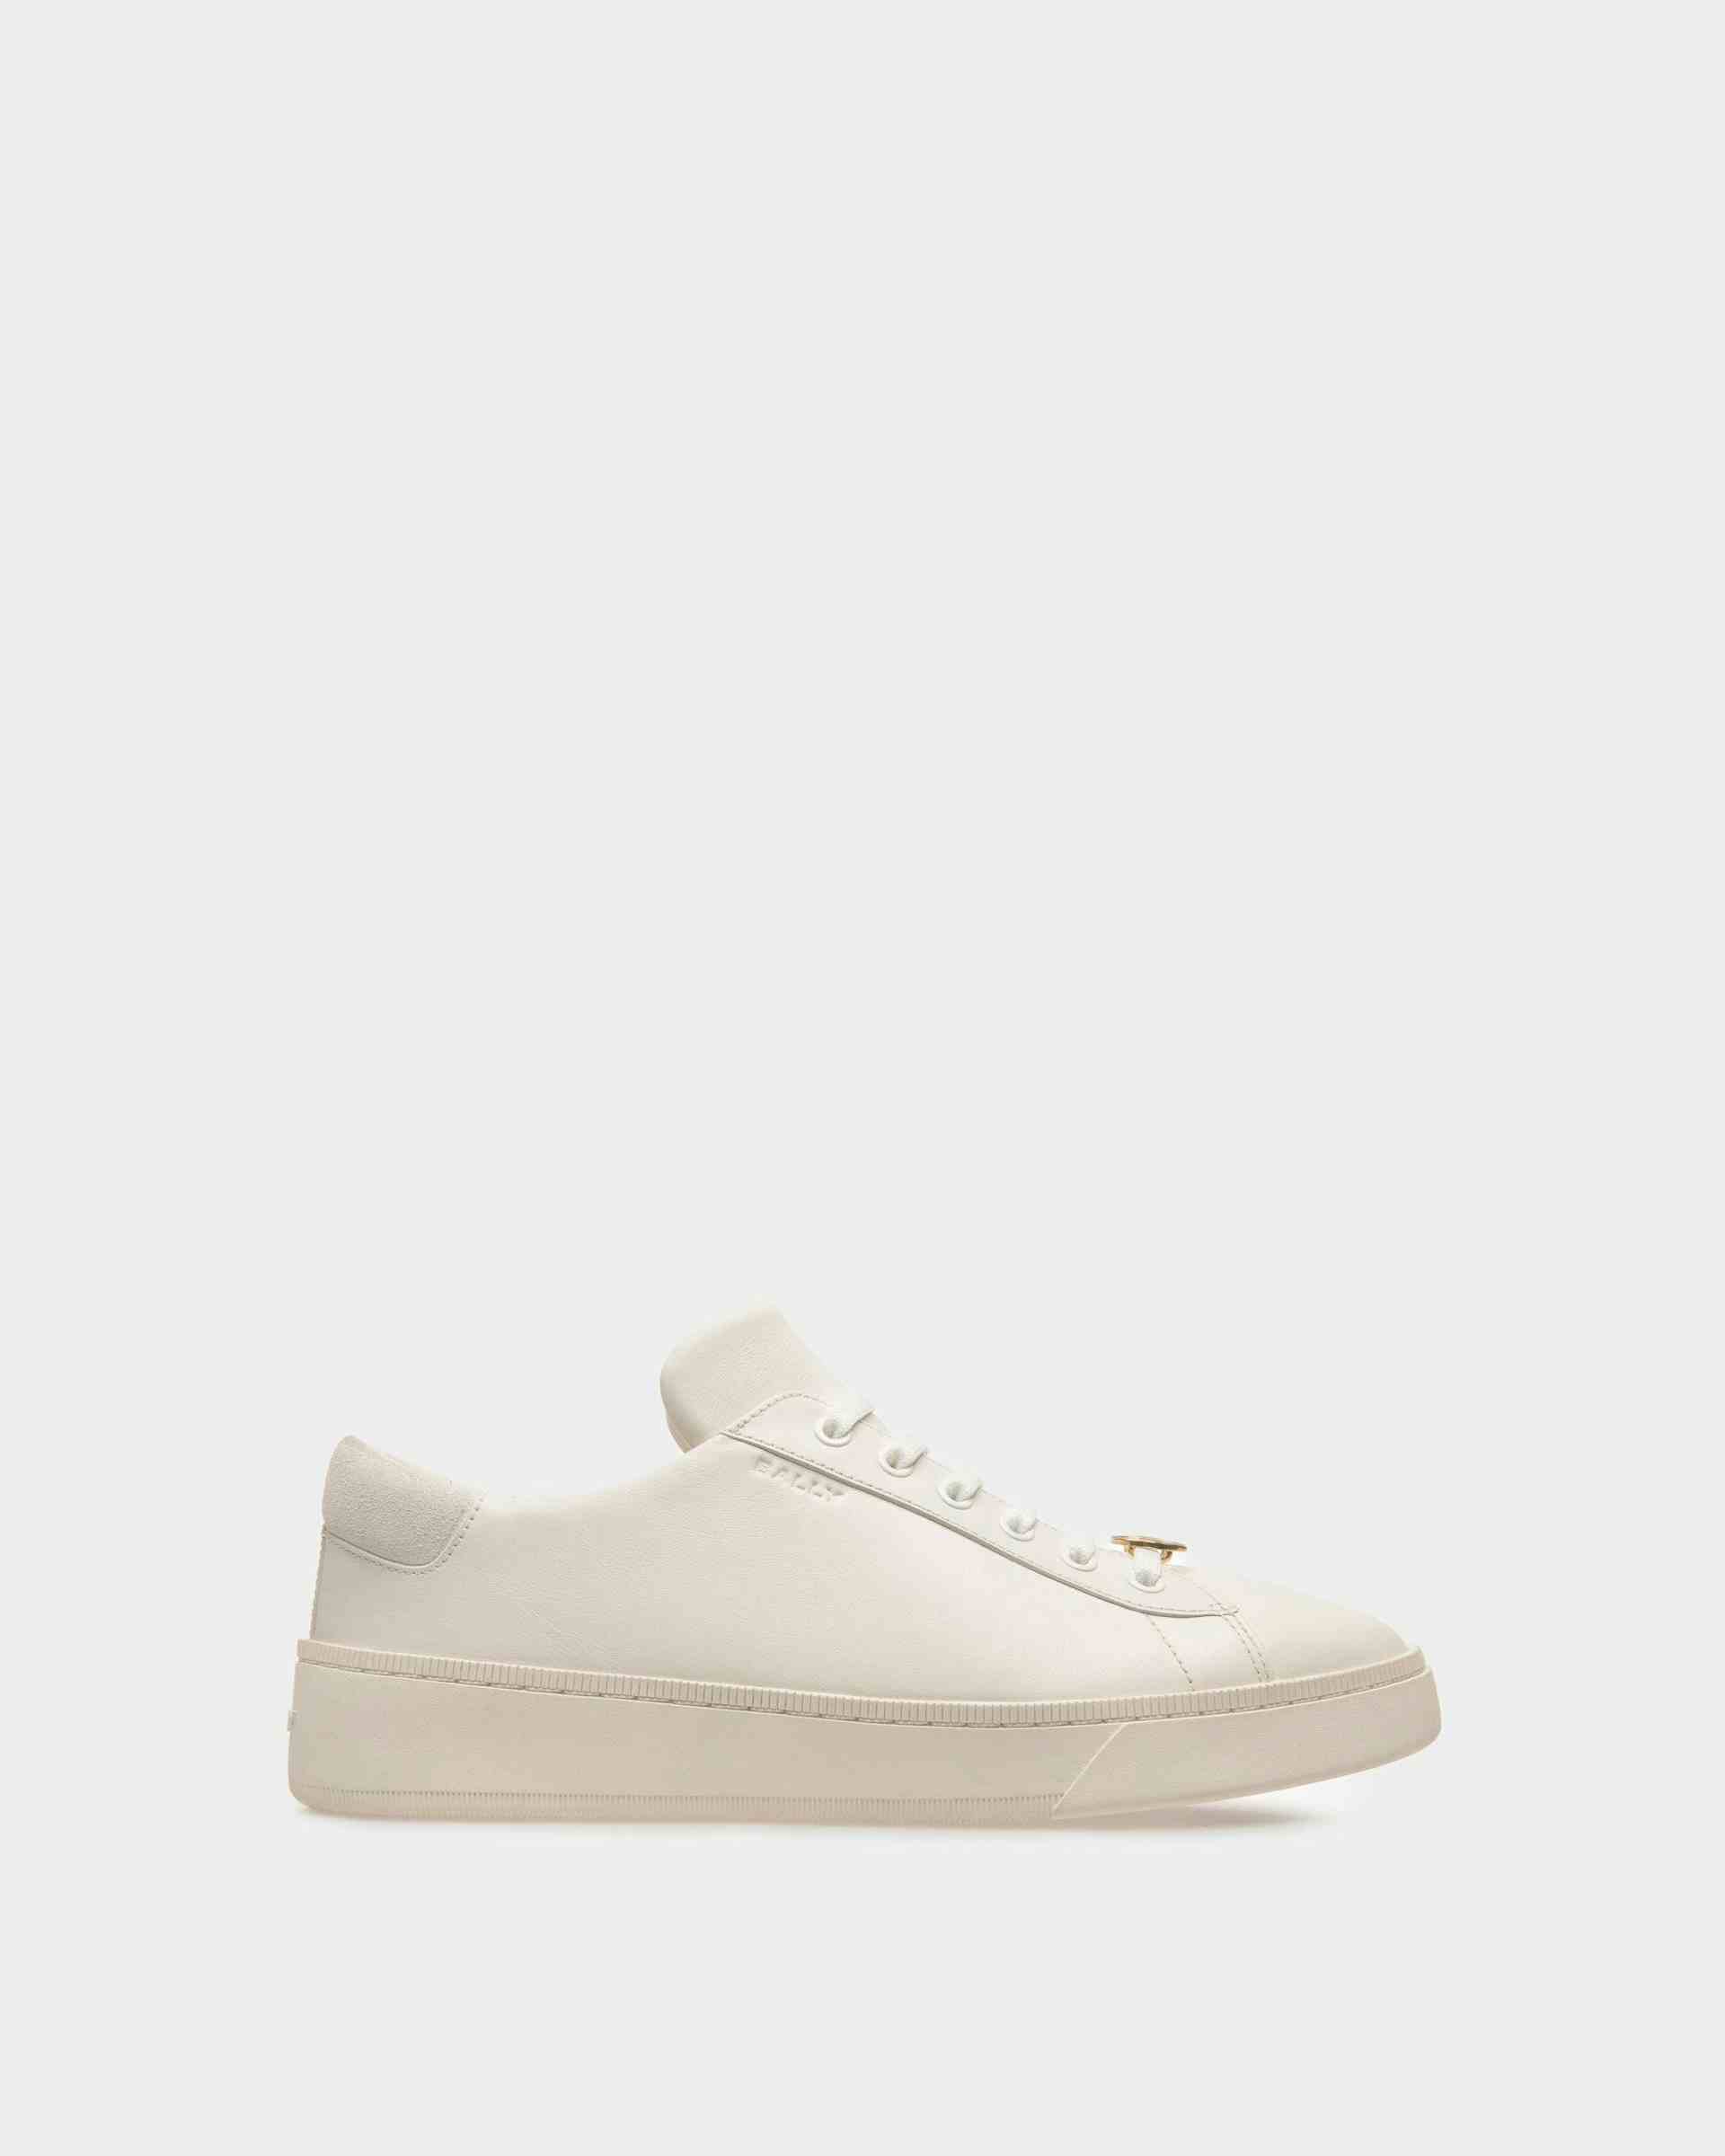 Raise Sneakers In White Leather - Men's - Bally